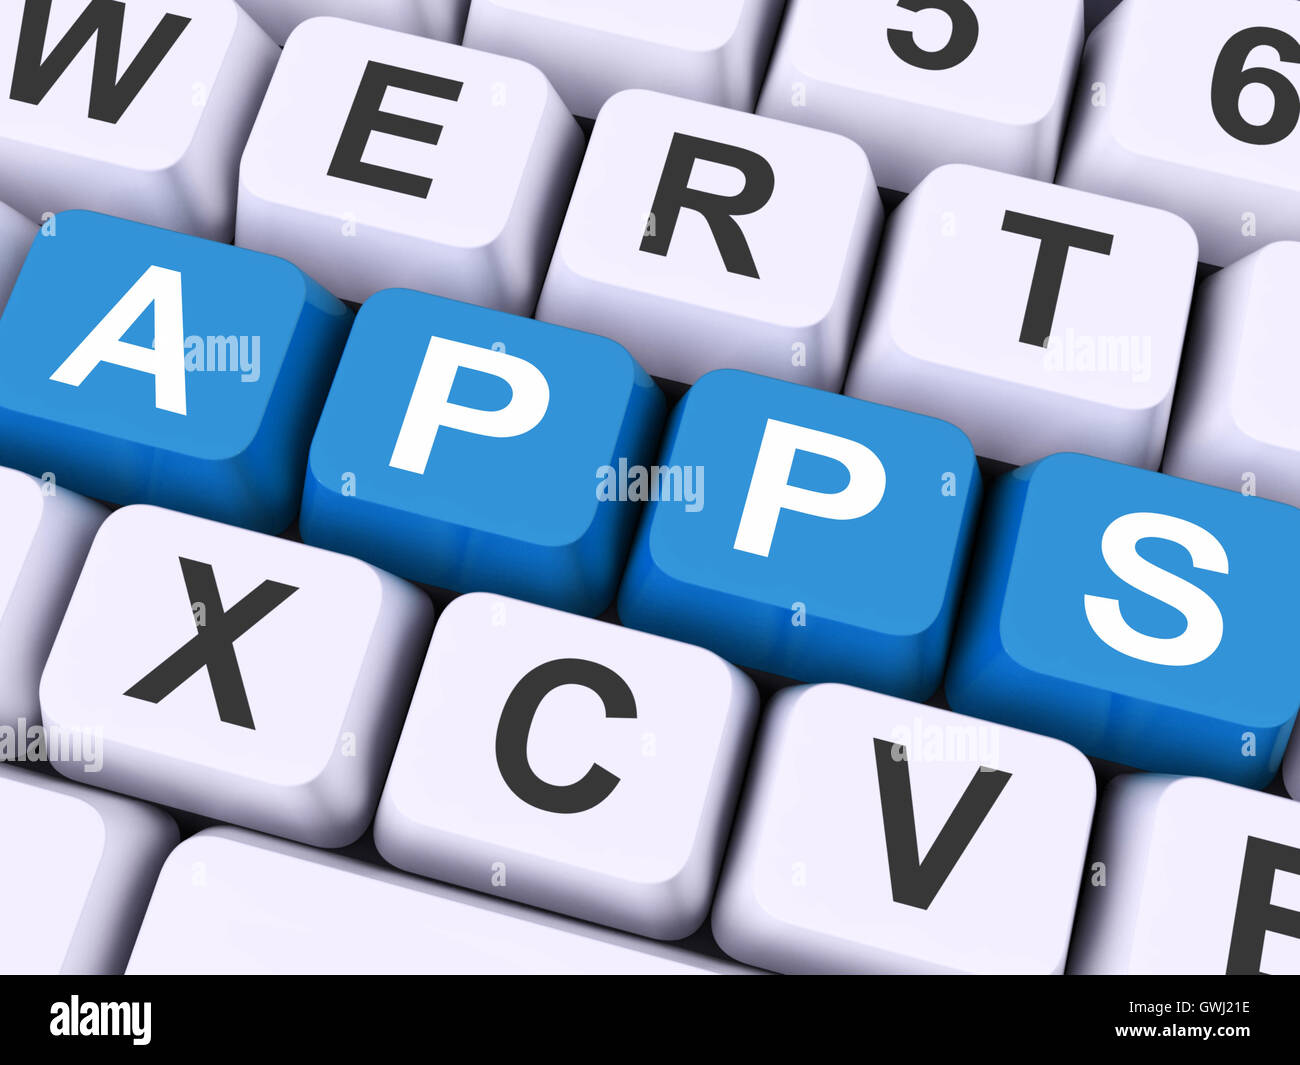 Apps Keys Shows Web Application Or Applications Stock Photo